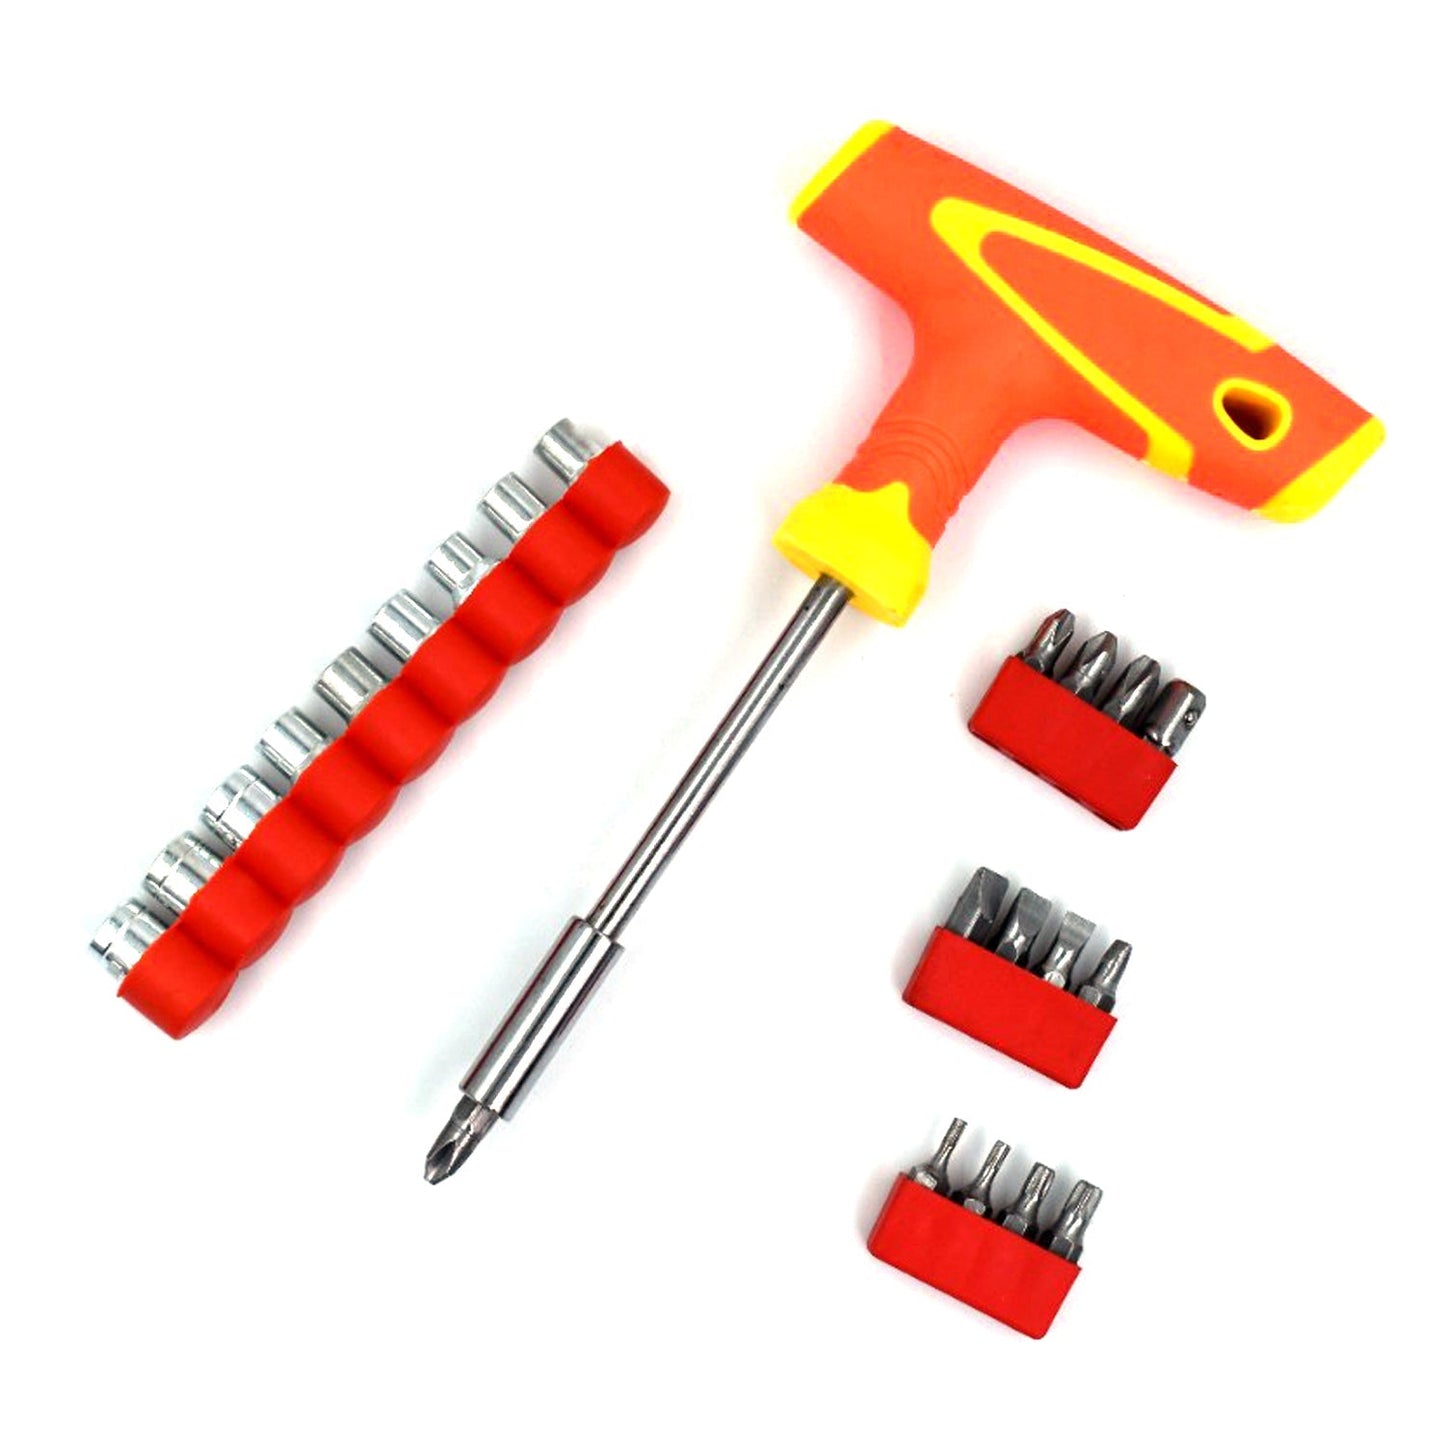 9181 SCREWDRIVER SET, STEEL 22 IN 1 WITH 21 SCREWDRIVER BITS Dukandaily